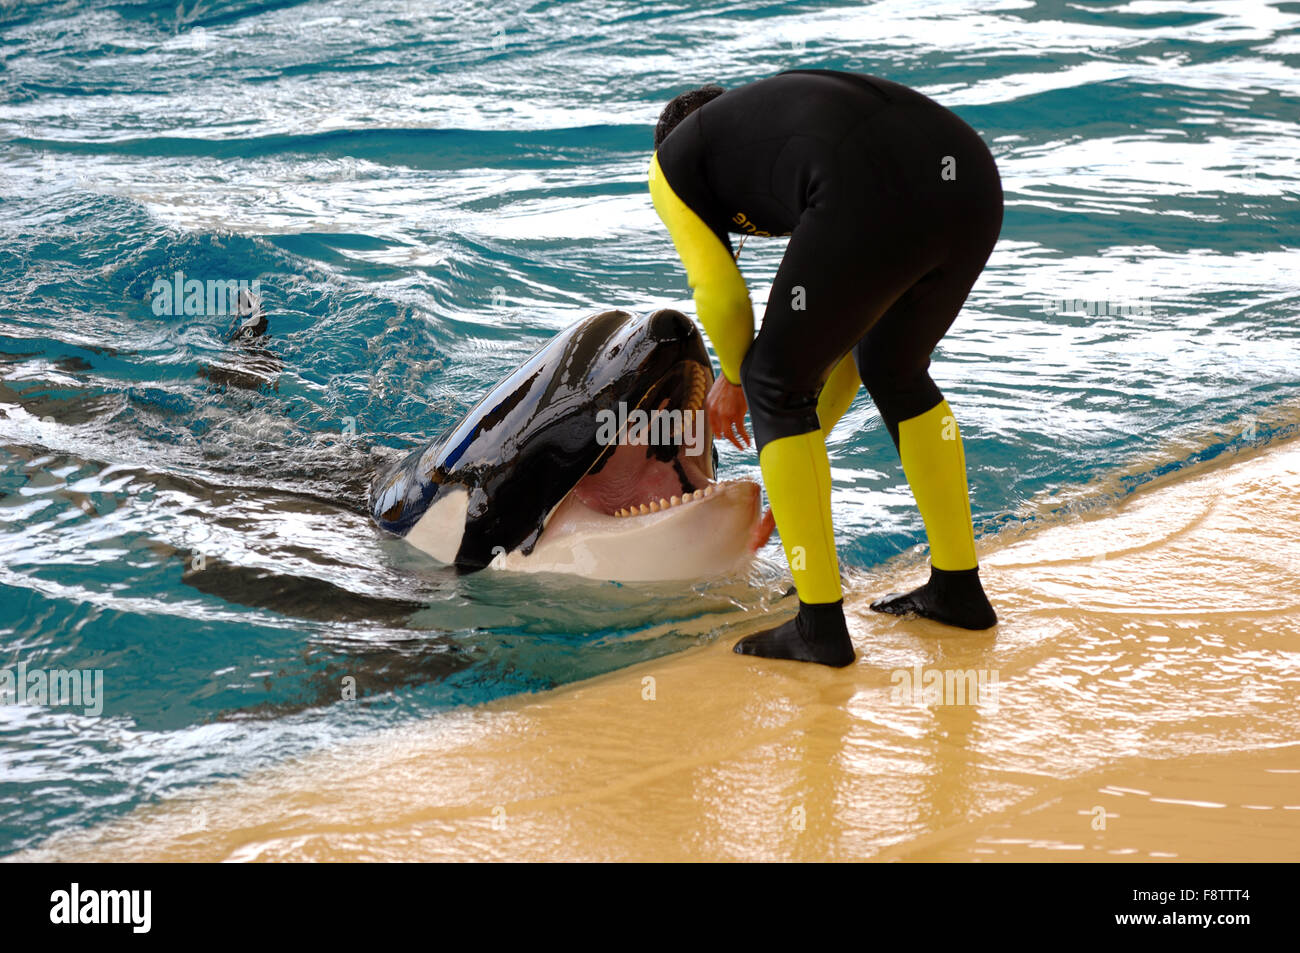 Man and killer whale Stock Photo